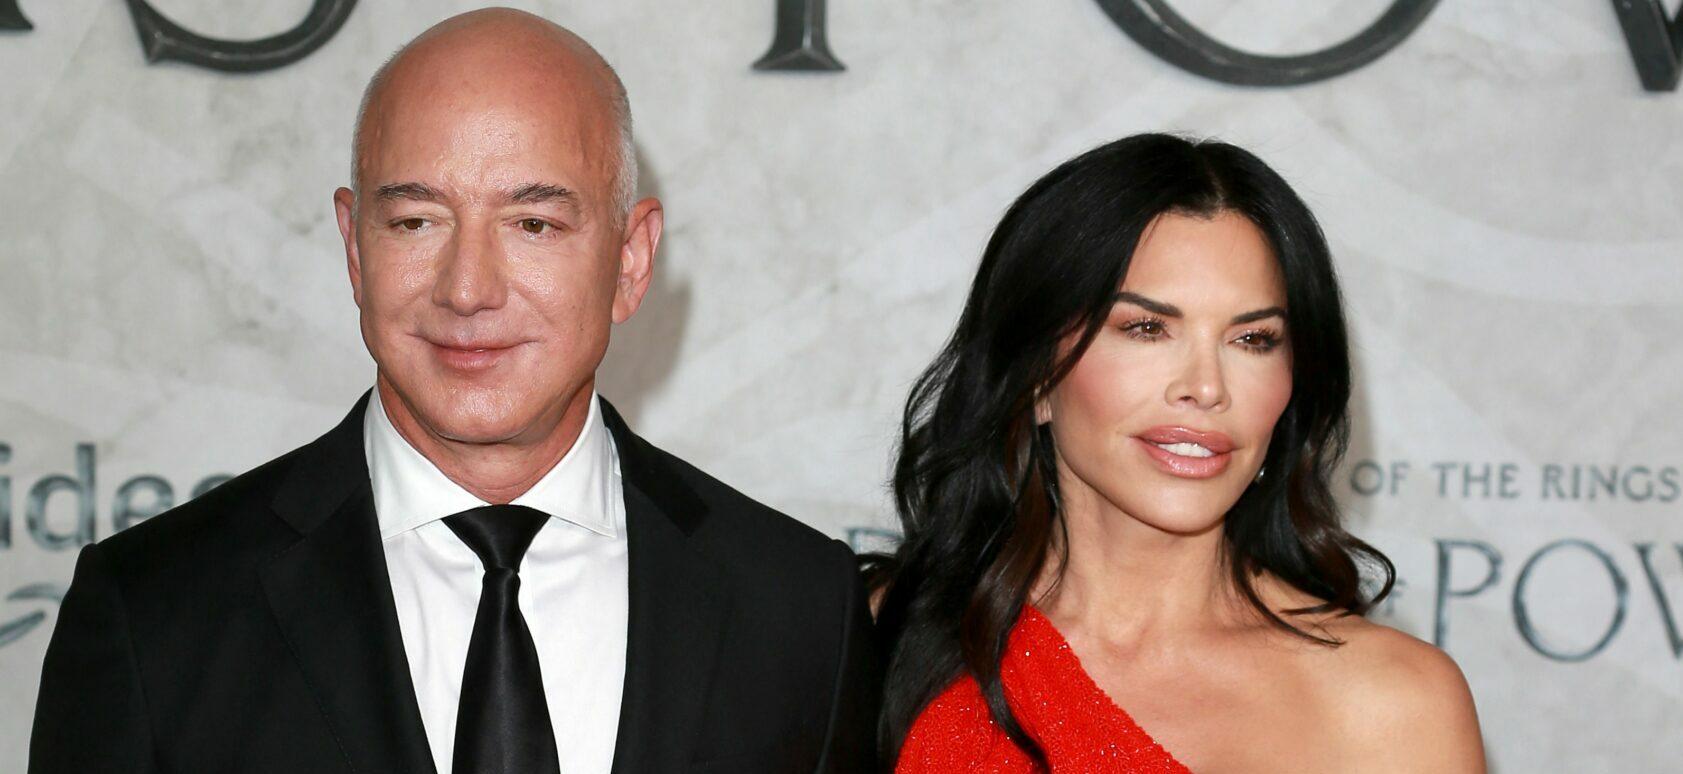 Lauren Sánchez: I ‘Blacked Out’ After Jeff Bezos Proposed On $500M Yacht